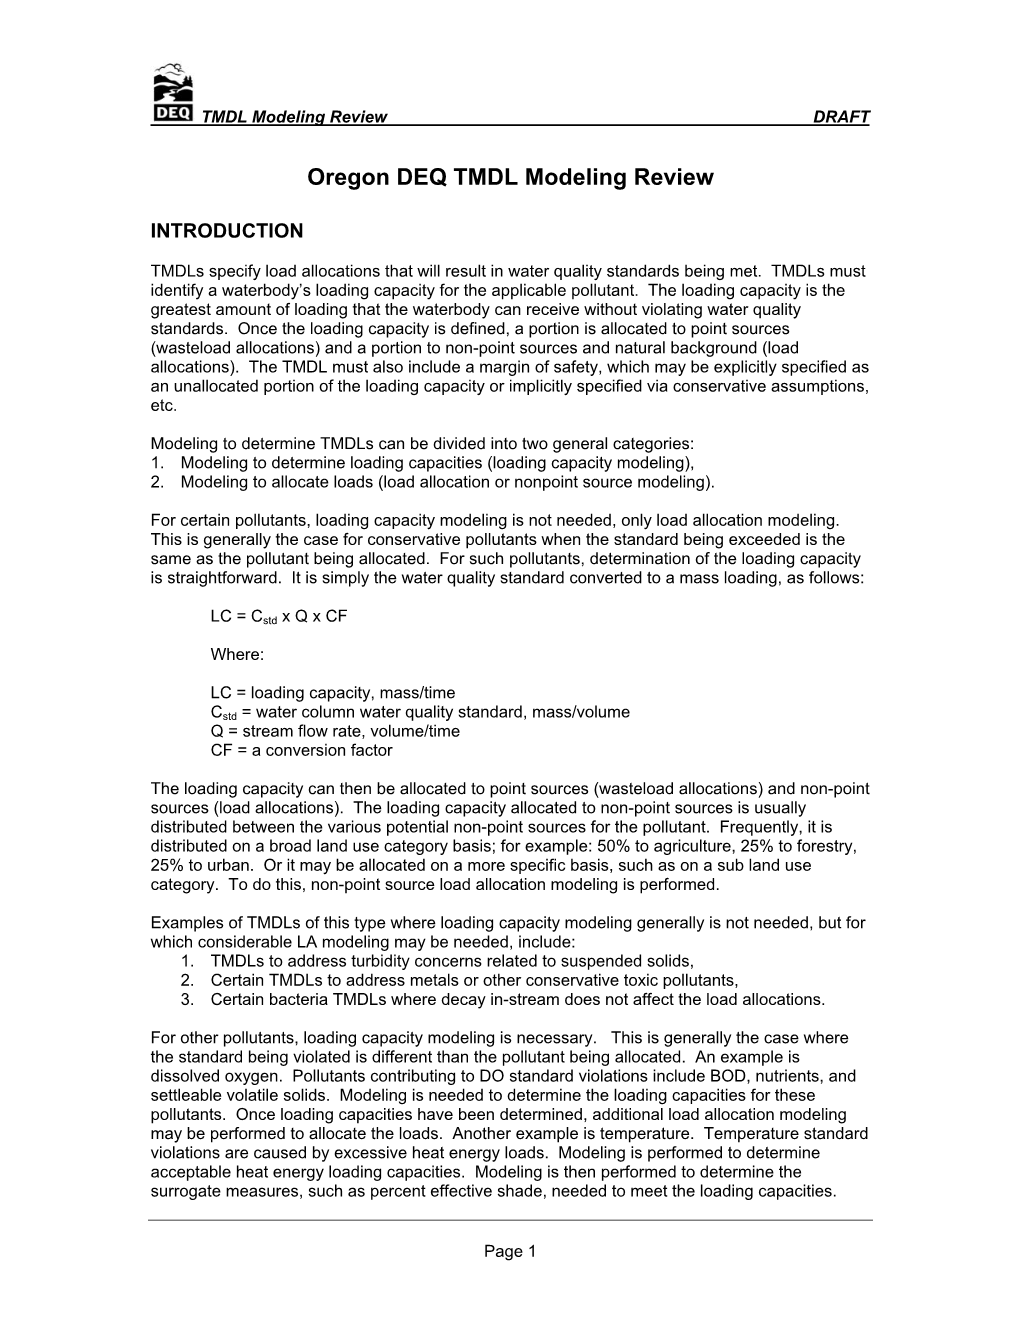 DEQ TMDL Modeling Review